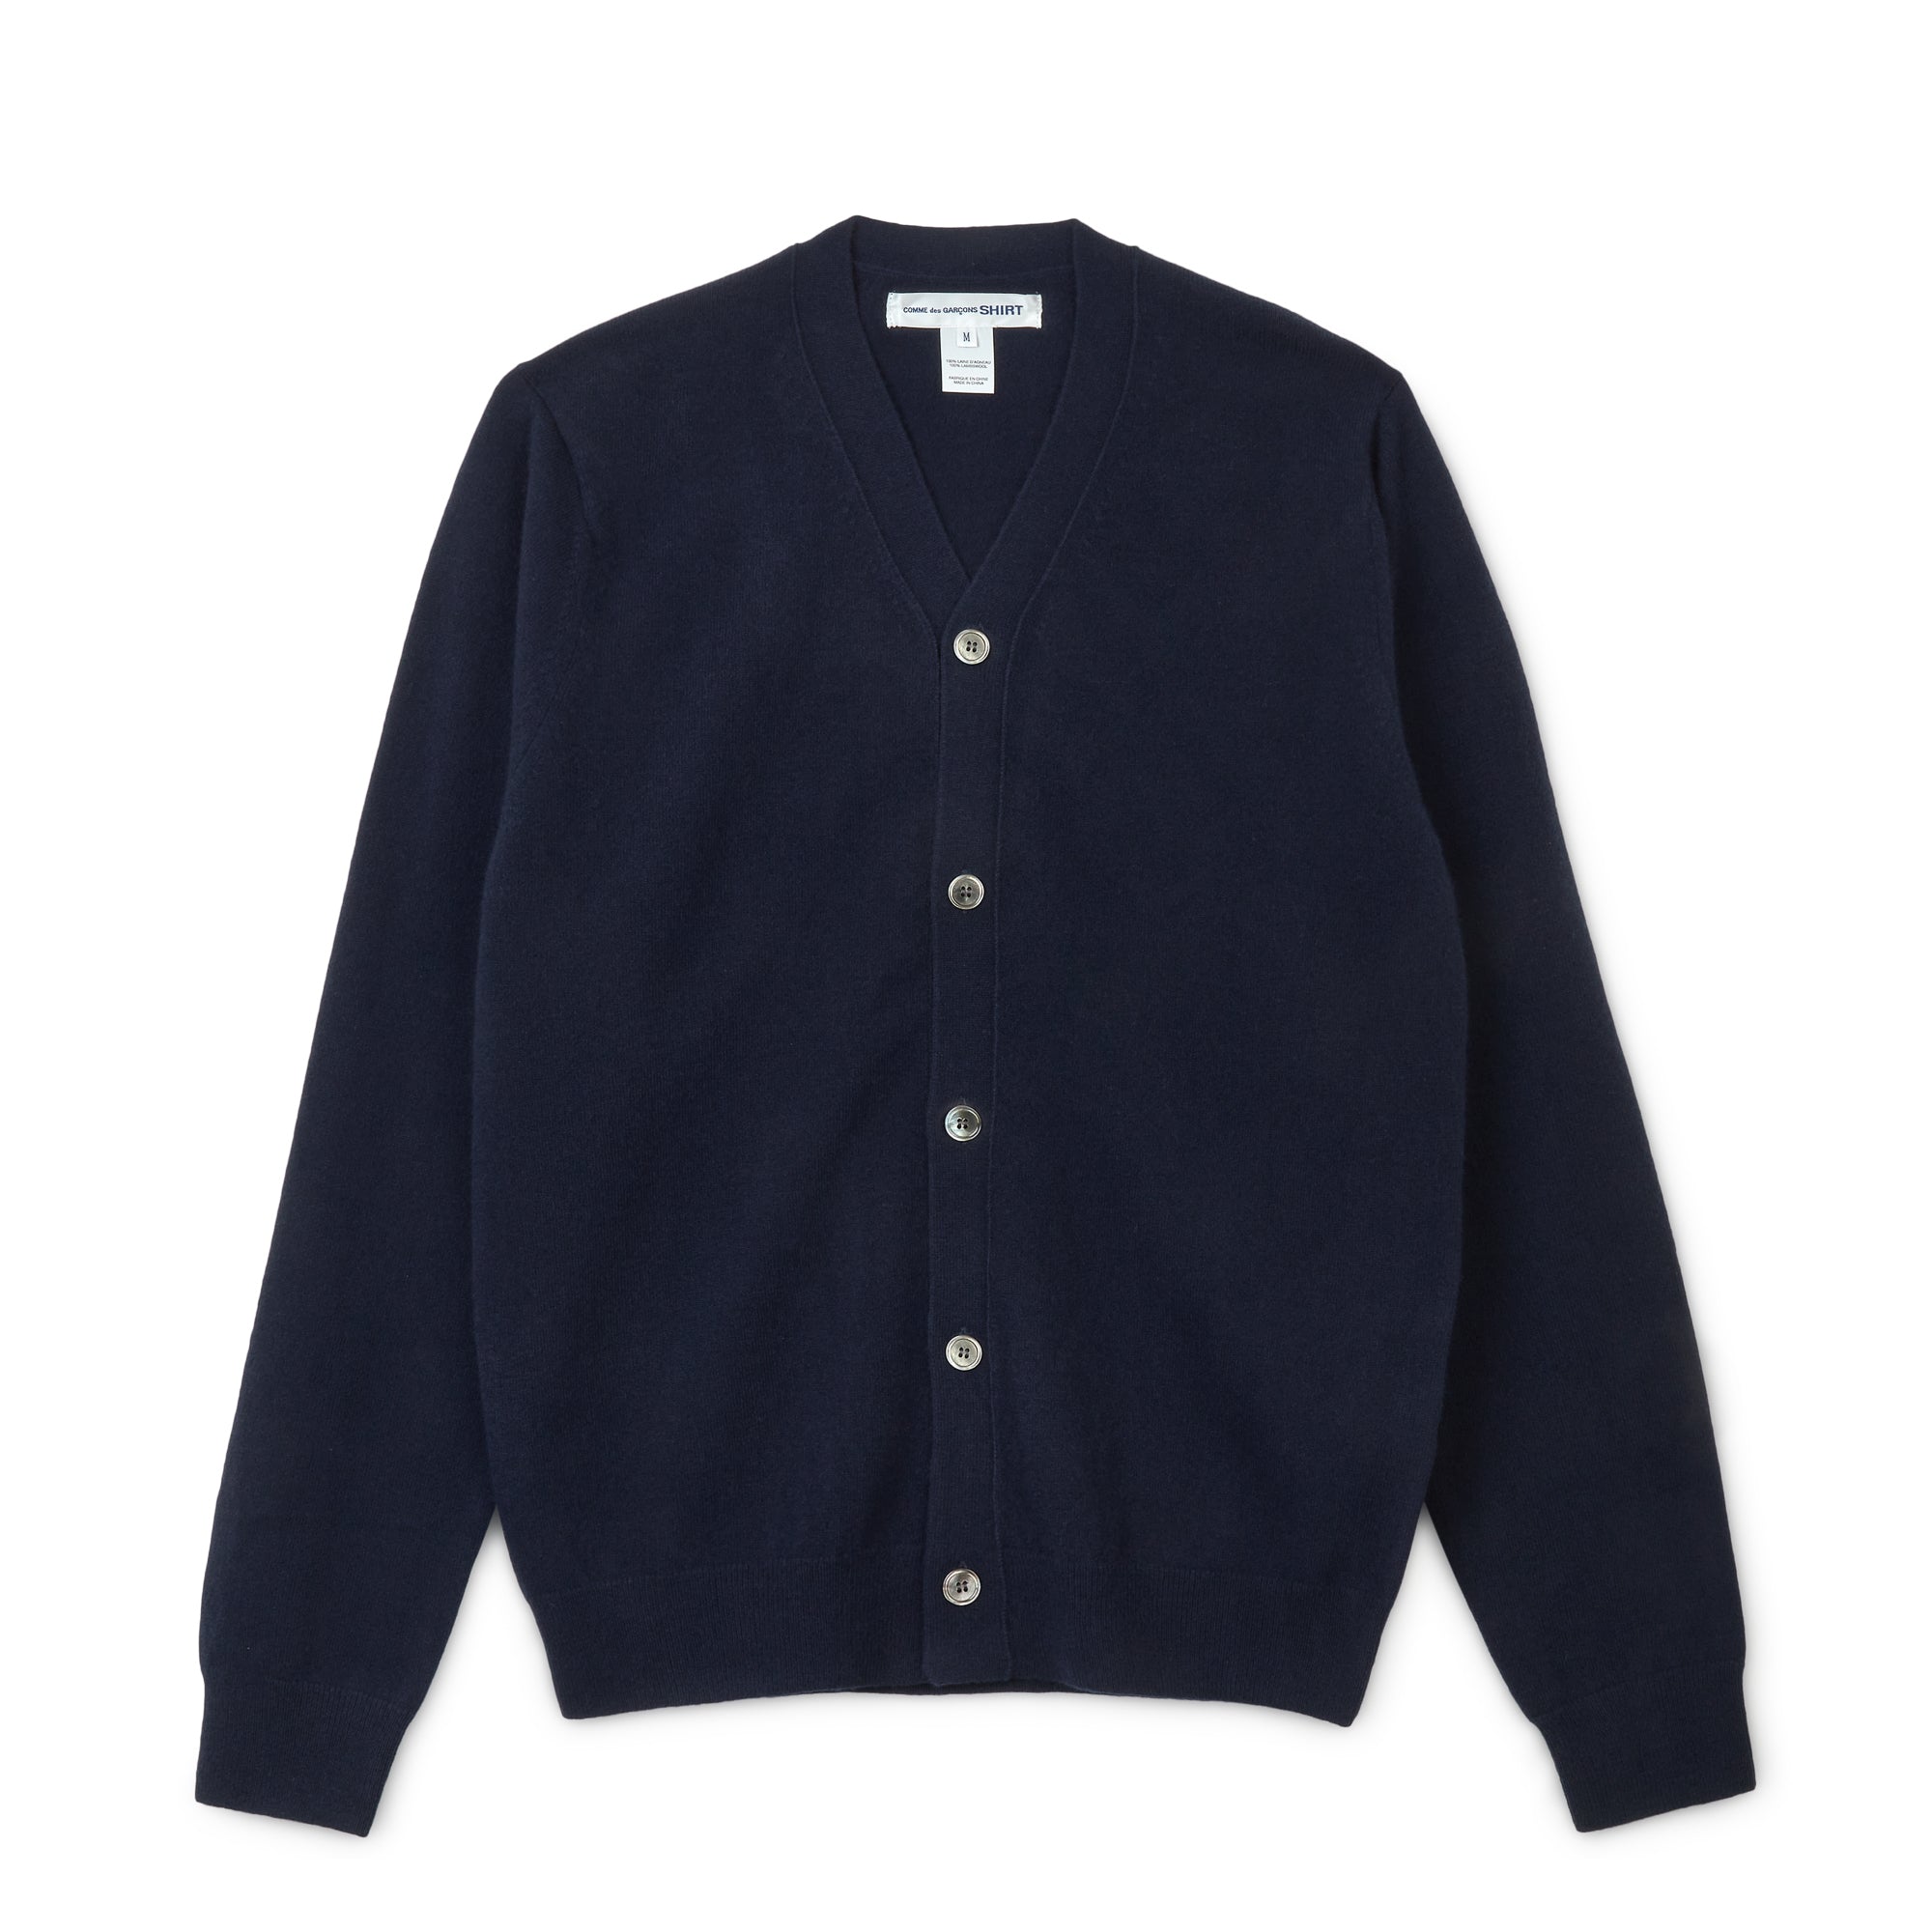 CDG Shirt Forever - V-Neck Lambswool Cardigan - (Navy) view 1